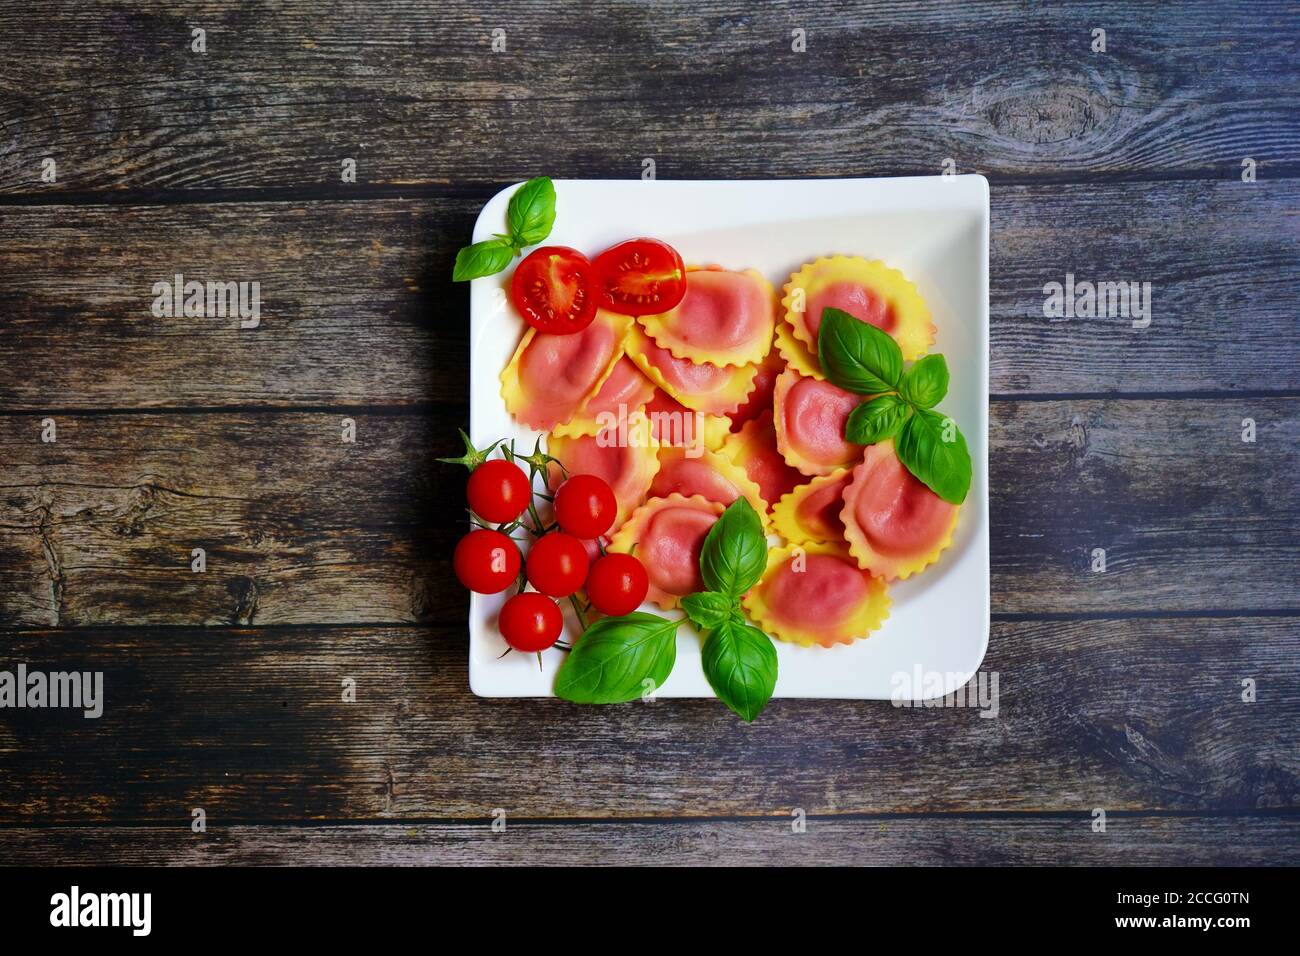 Home-made pasta / ravioli filled with root beet on a white plate with wooden table background. Tomatoes and fresh basil for decoration. Stock Photo